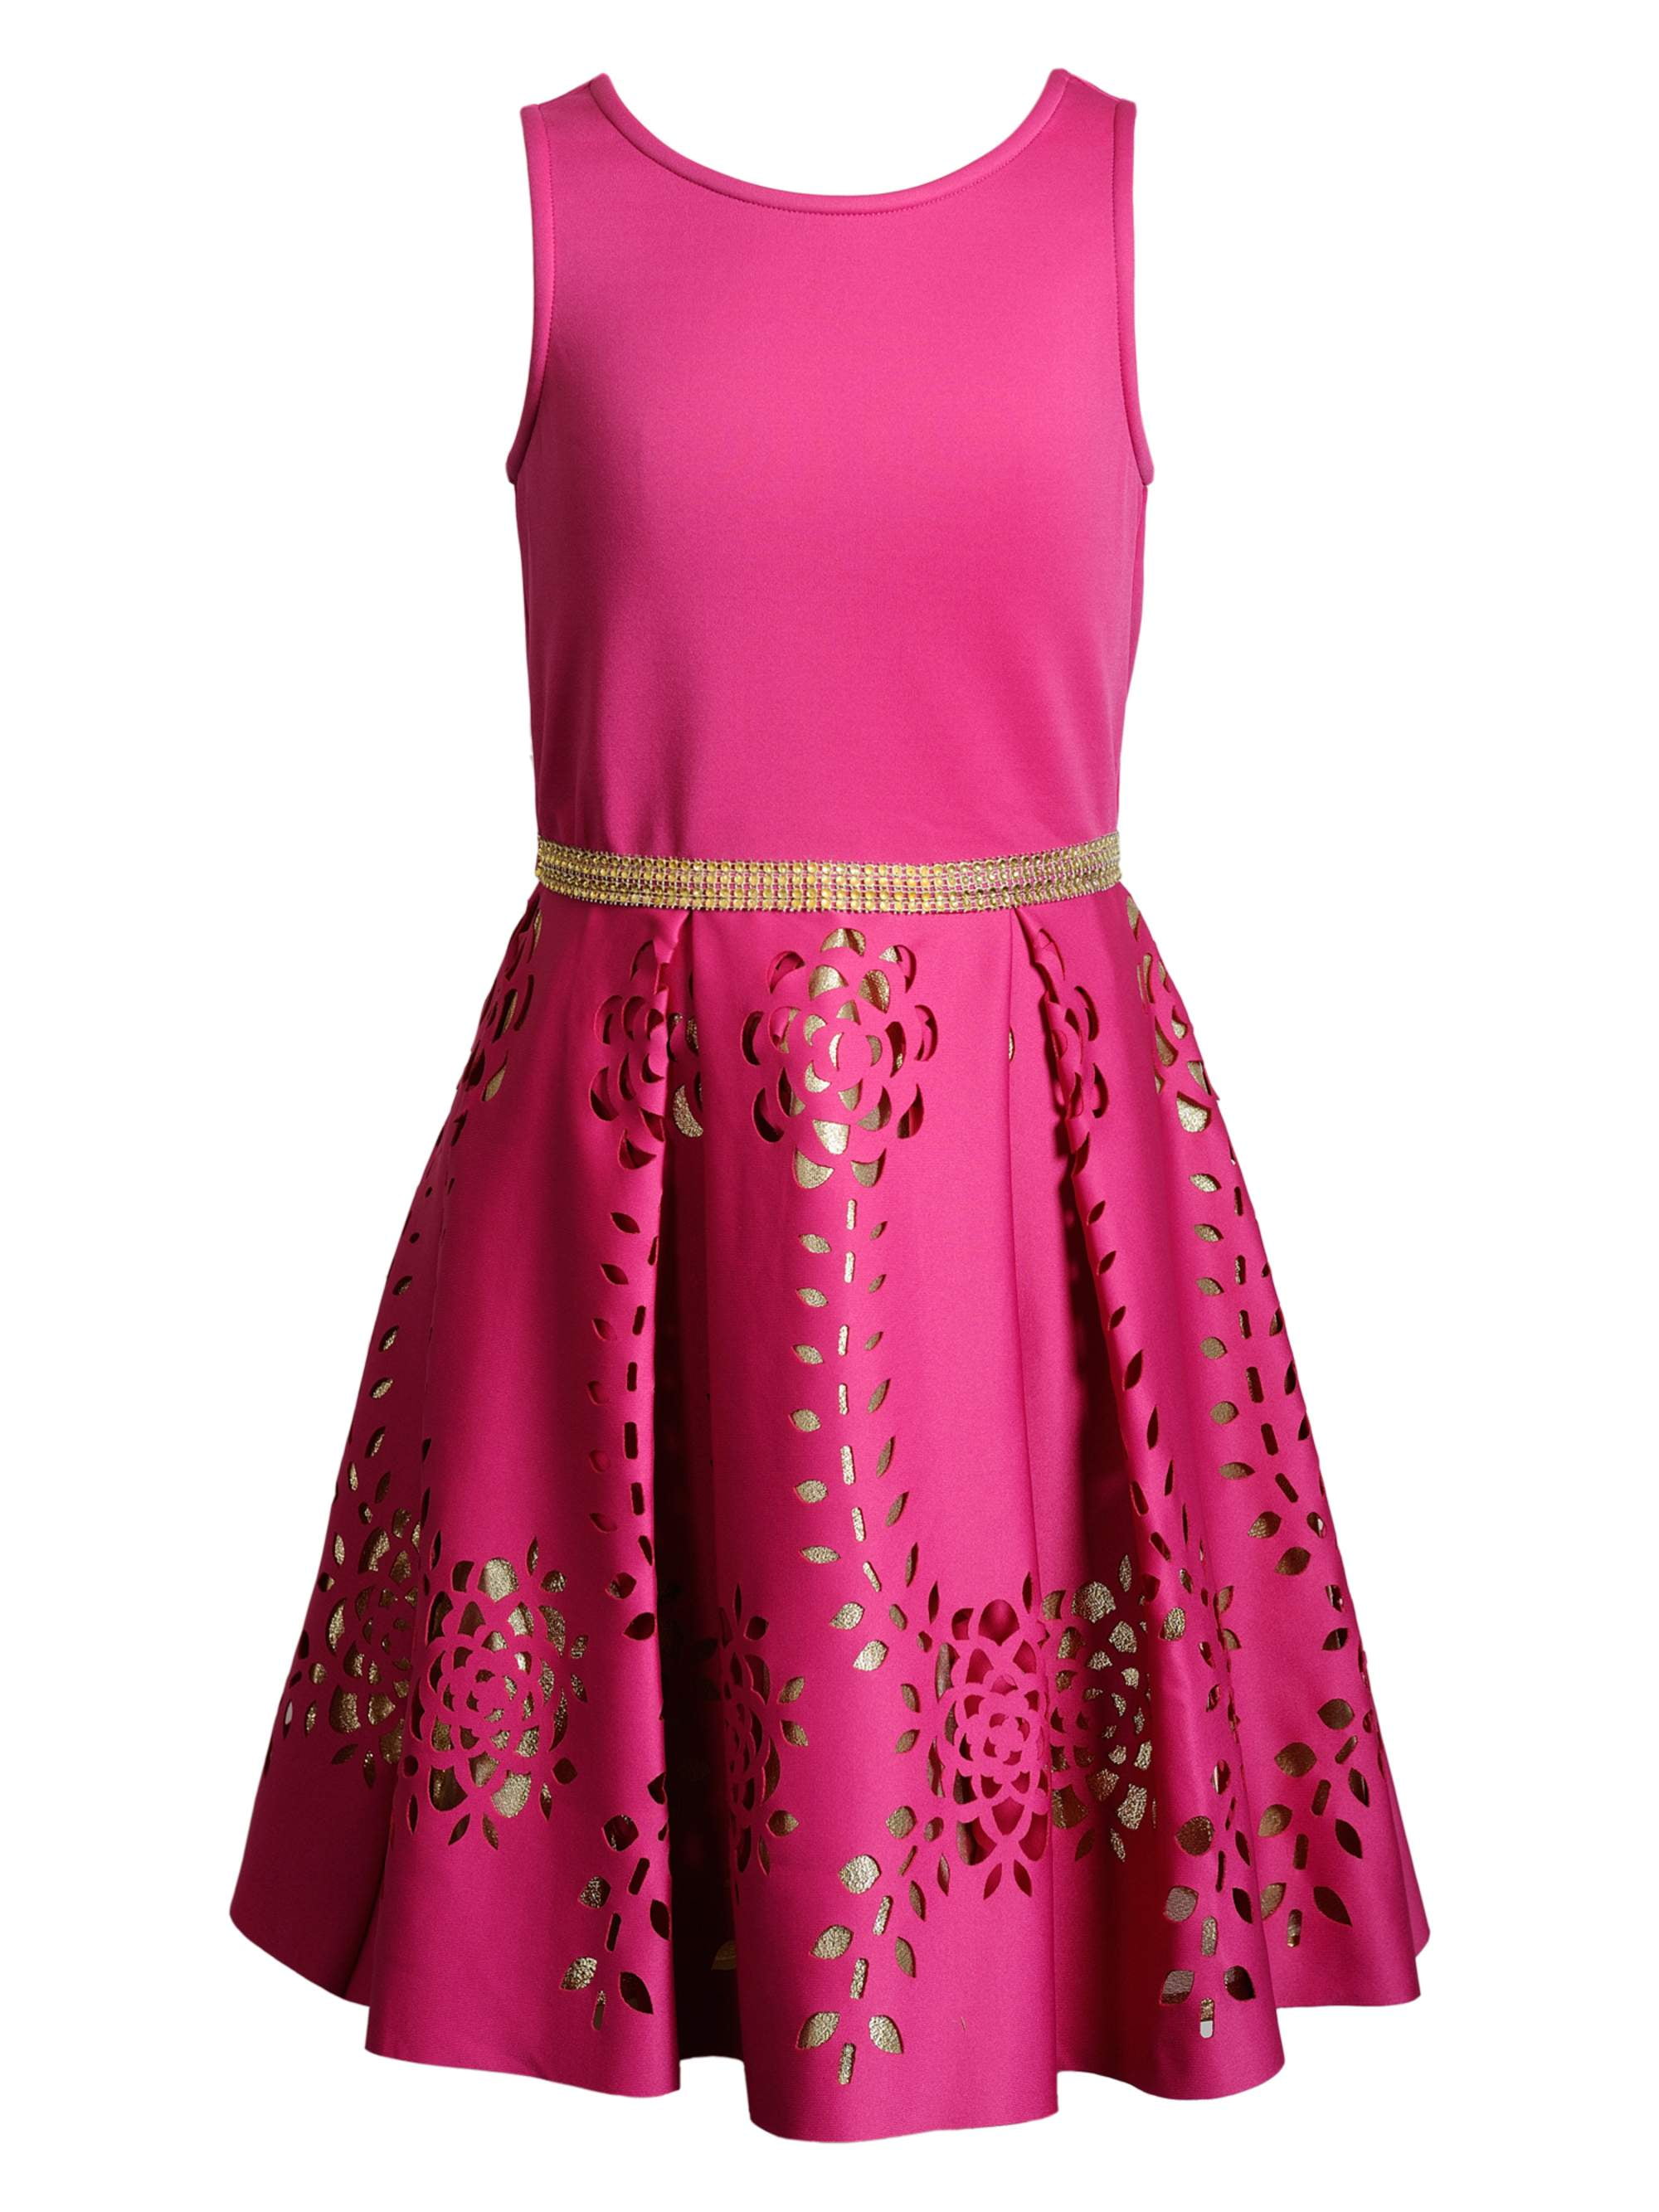 Sparkle Lace Fit and Flare Dress (Big Girls) - Walmart.com